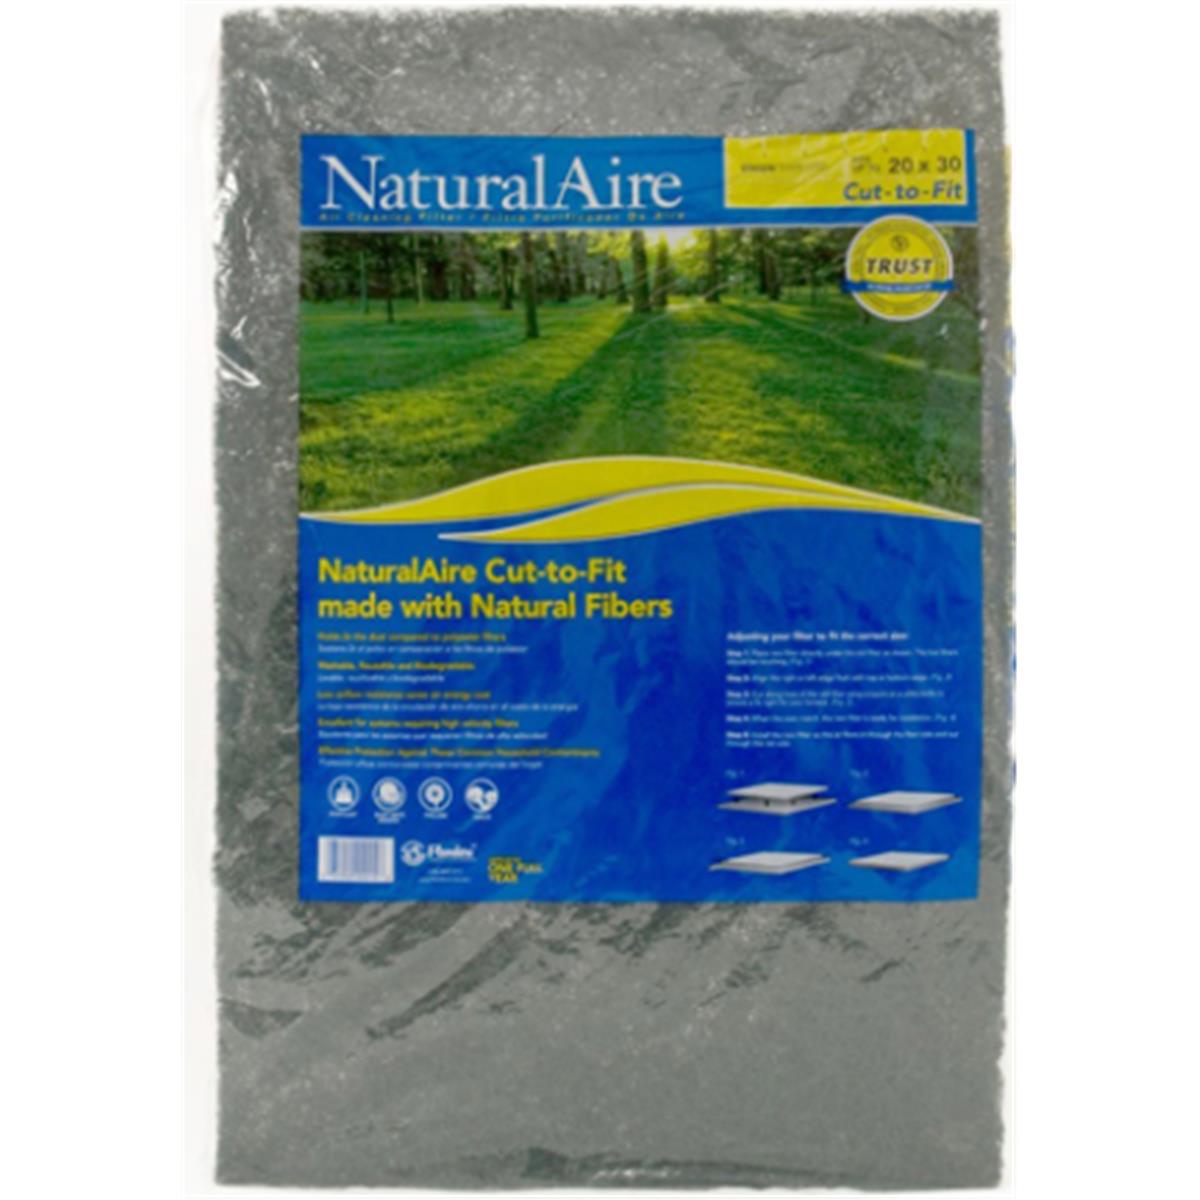 Sm1006 Natural Aire Cut-to-fit Filter - Pack Of 6 - 20 X 30 X 1 In.